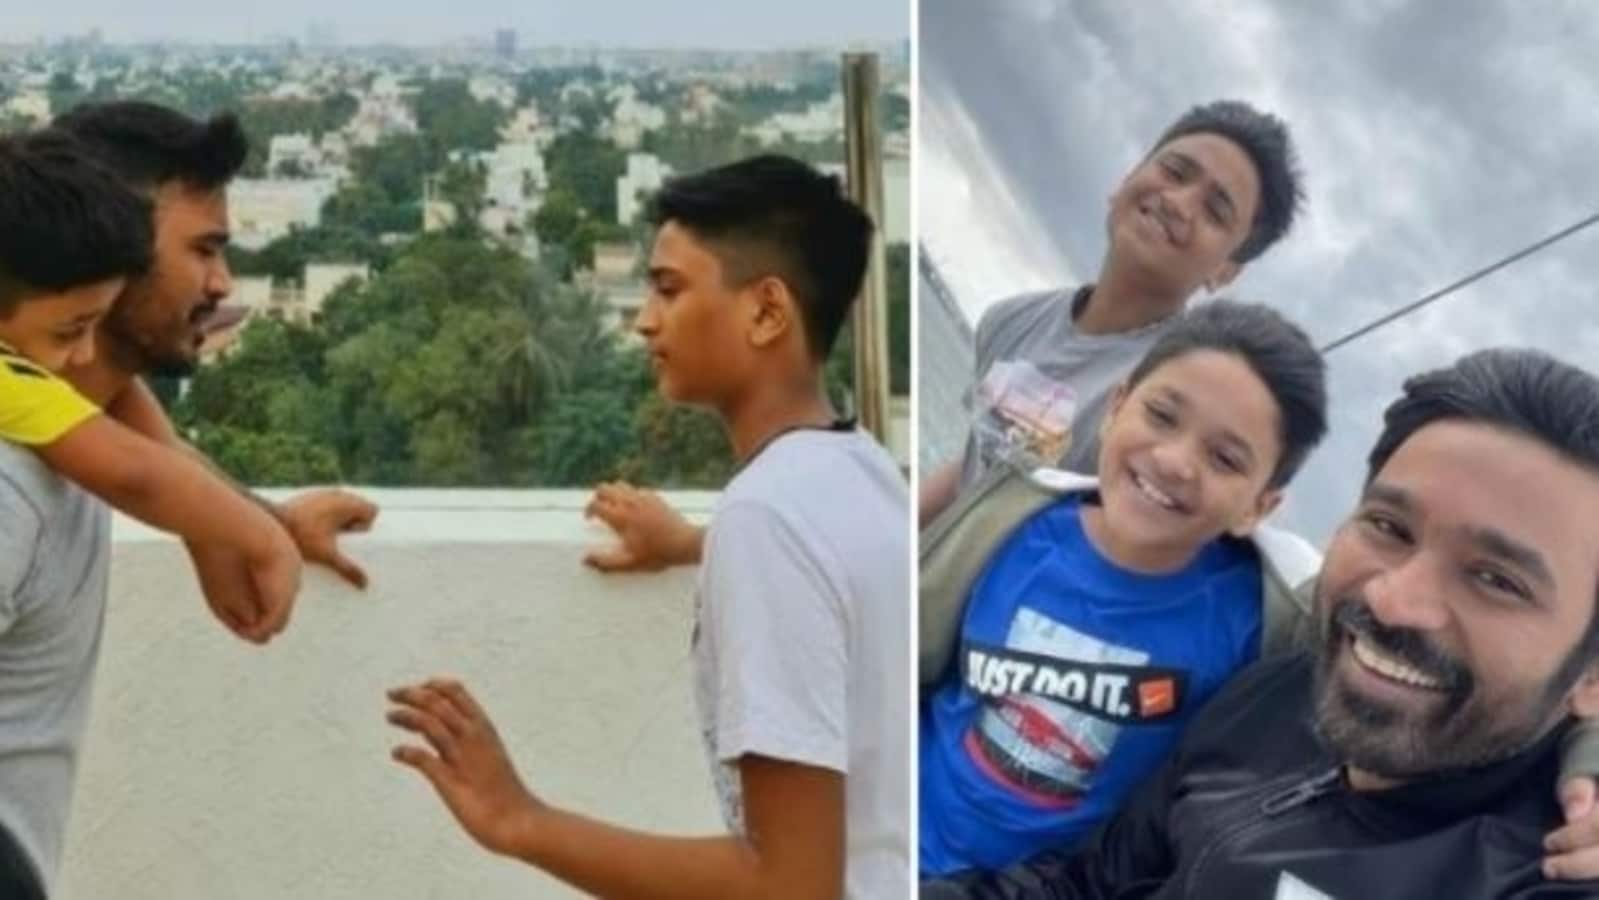 On Father's Day, Dhanush shares pic with sons Linga and Yatra: 'You guys  mean the world to me' - Hindustan Times